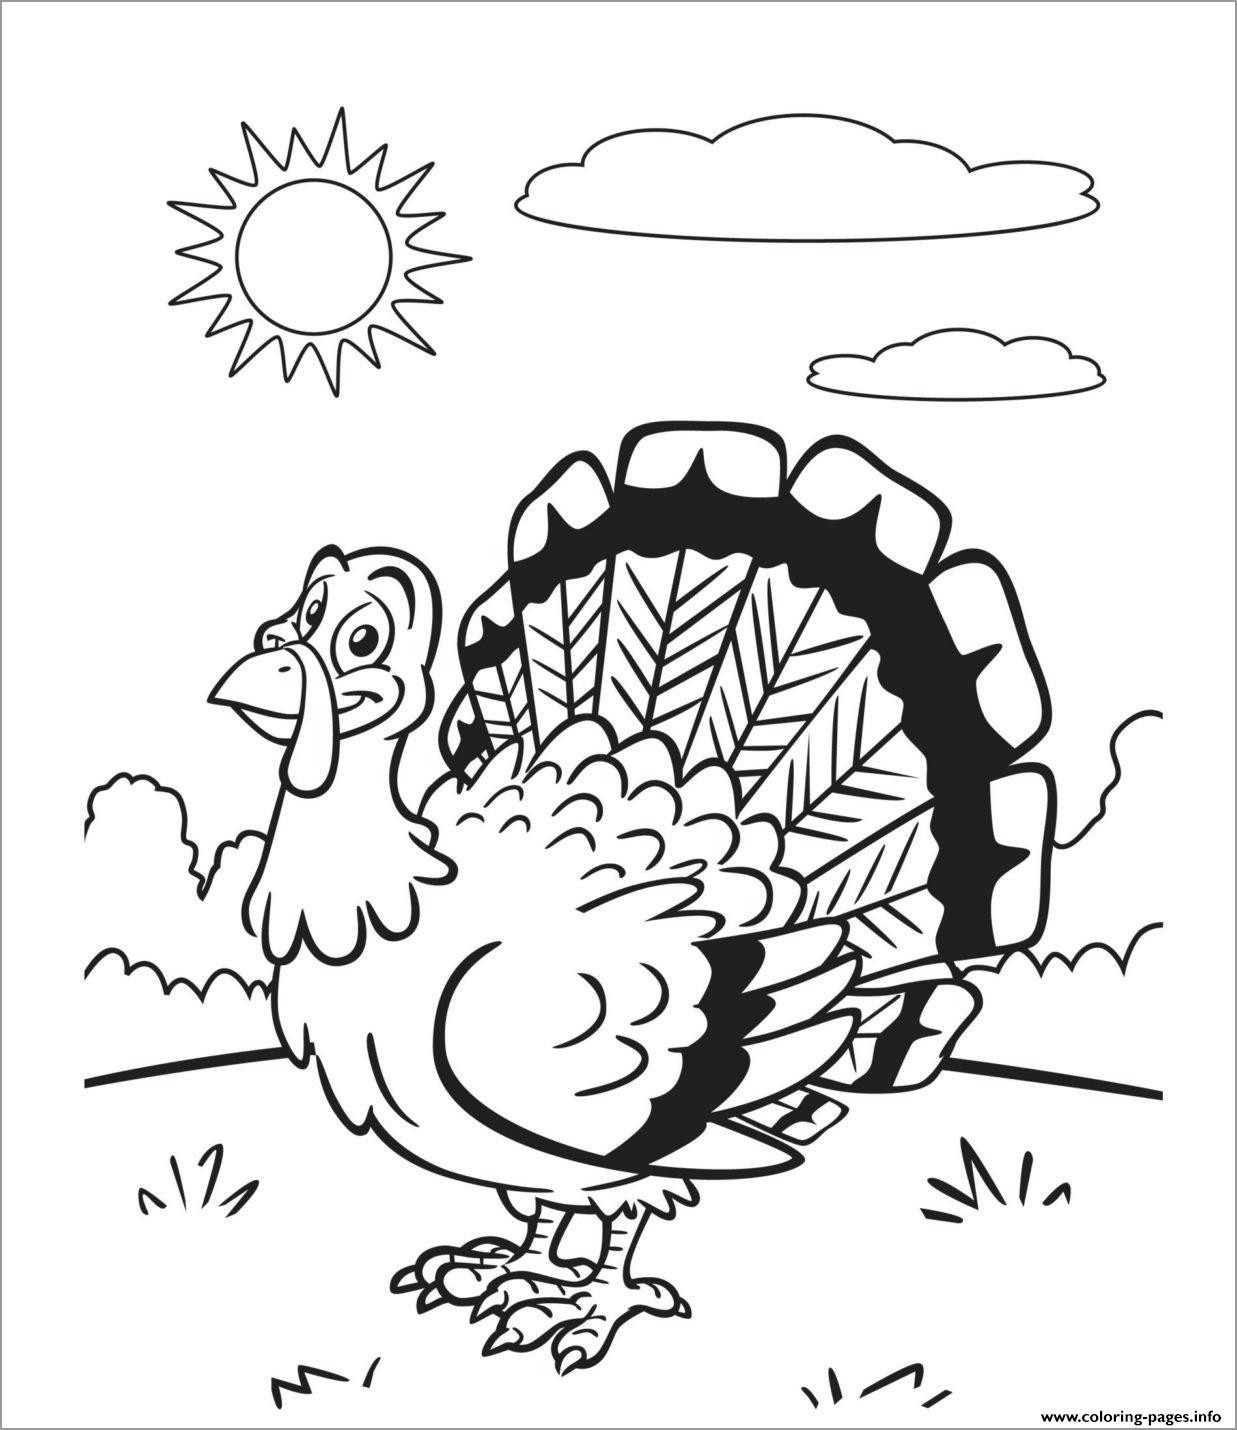 Printable Sunny Turkey Coloring Pages